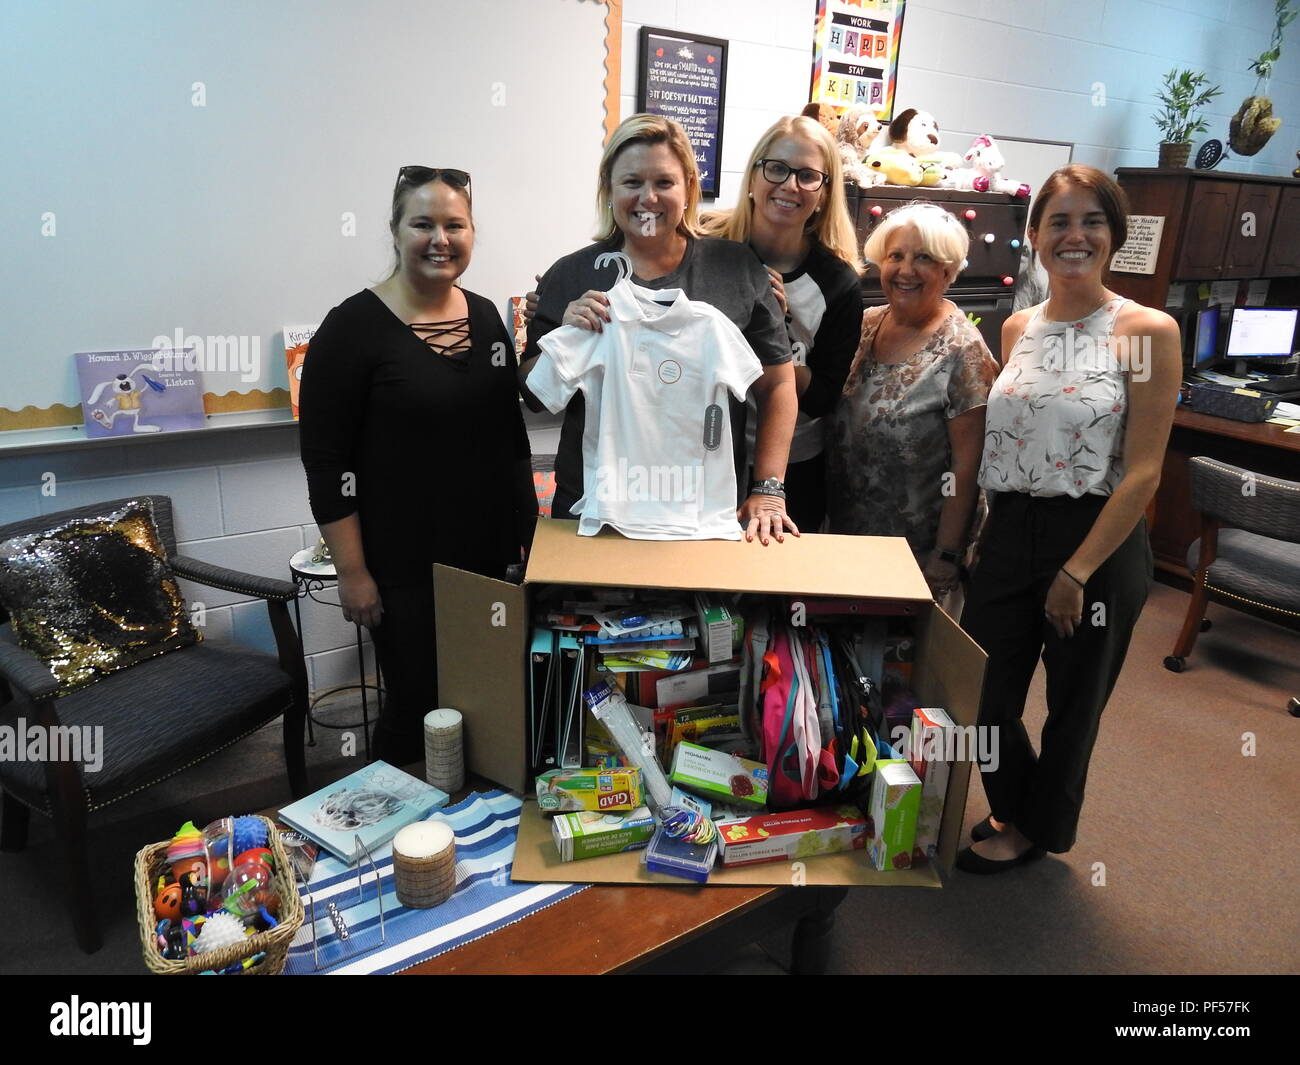 PANAMA CITY, Florida - Deniece Moss (center), principal at West Bay Elementary School poses with employees of Naval Surface Warfare Center Panama City Division’s (NSWC PCD) Test and Evaluation Prototype Fabrication Division. The group collected needed school supplies for Bay District School students in Panama City Beach, Florida August 13, 2018. Pictured from left to right: Nicole Waters, Deniece Moss, Michelle Armistead, Paula Oliver, and Halie Cameron. U.S. Navy photo by Susan H. Lawson Stock Photo